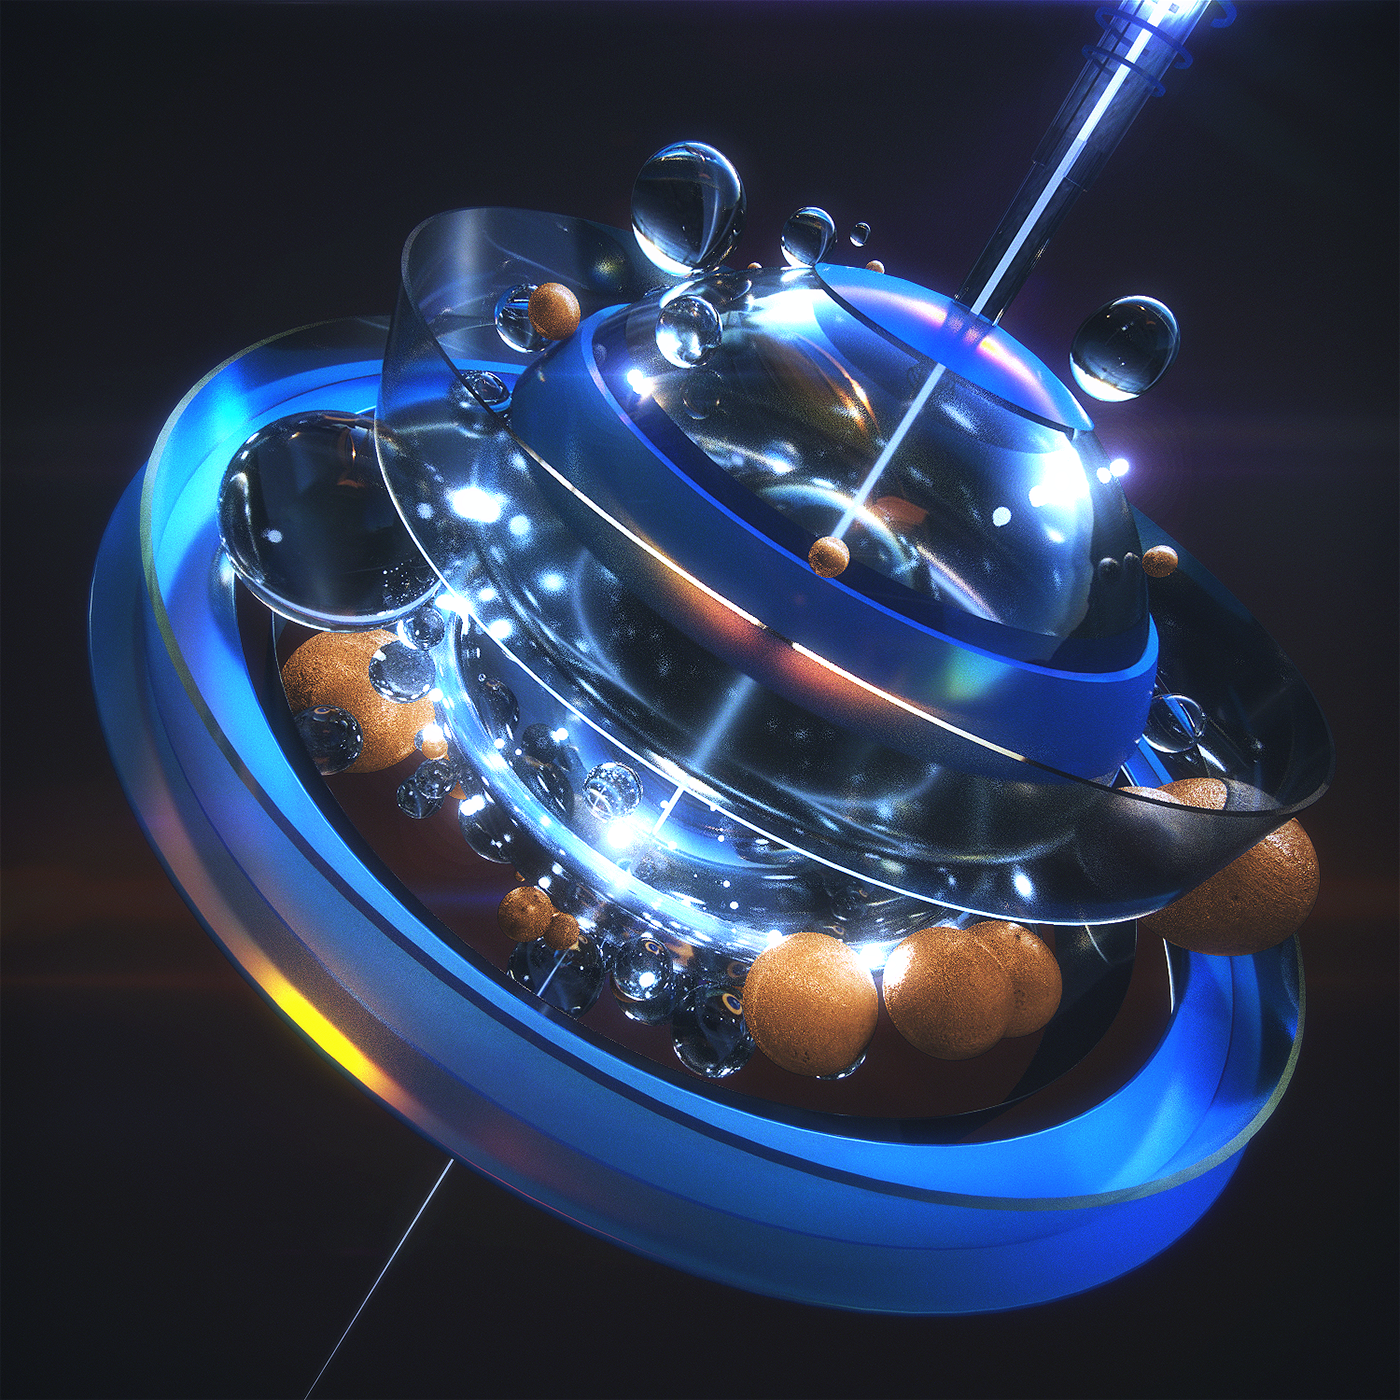 Cinema4D Octane 3D Abstract Redshift Design Cycles4D GPU Rendering